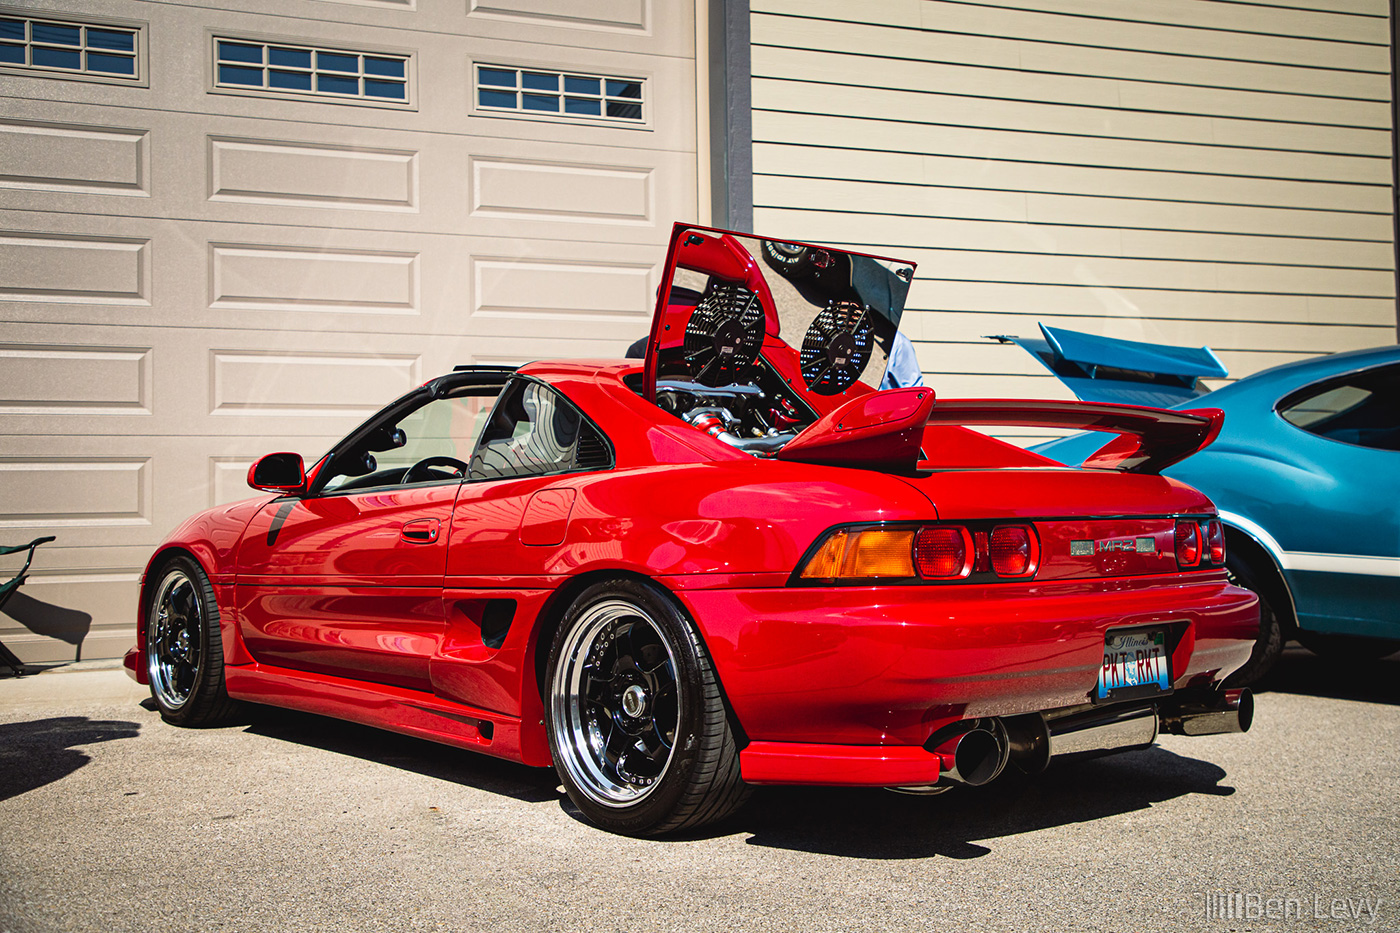 Red Toyota MR2 at a Car Show in Naperville, IL